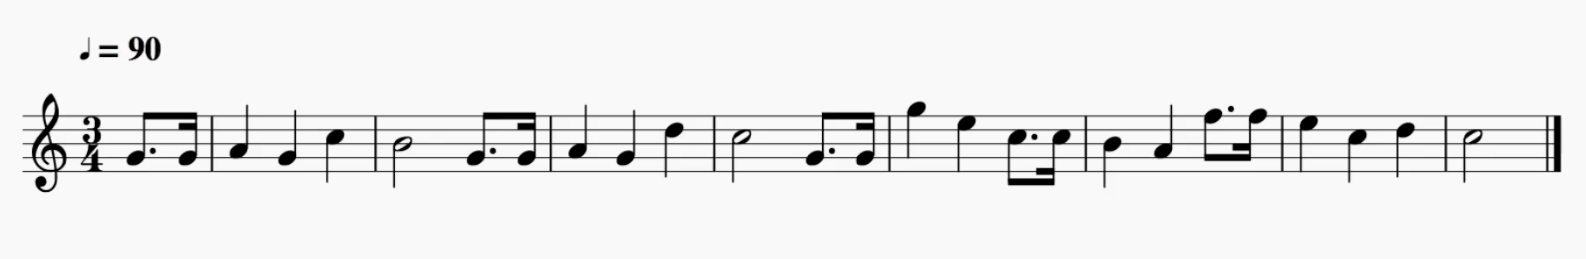 The 3/4 time signature or meter